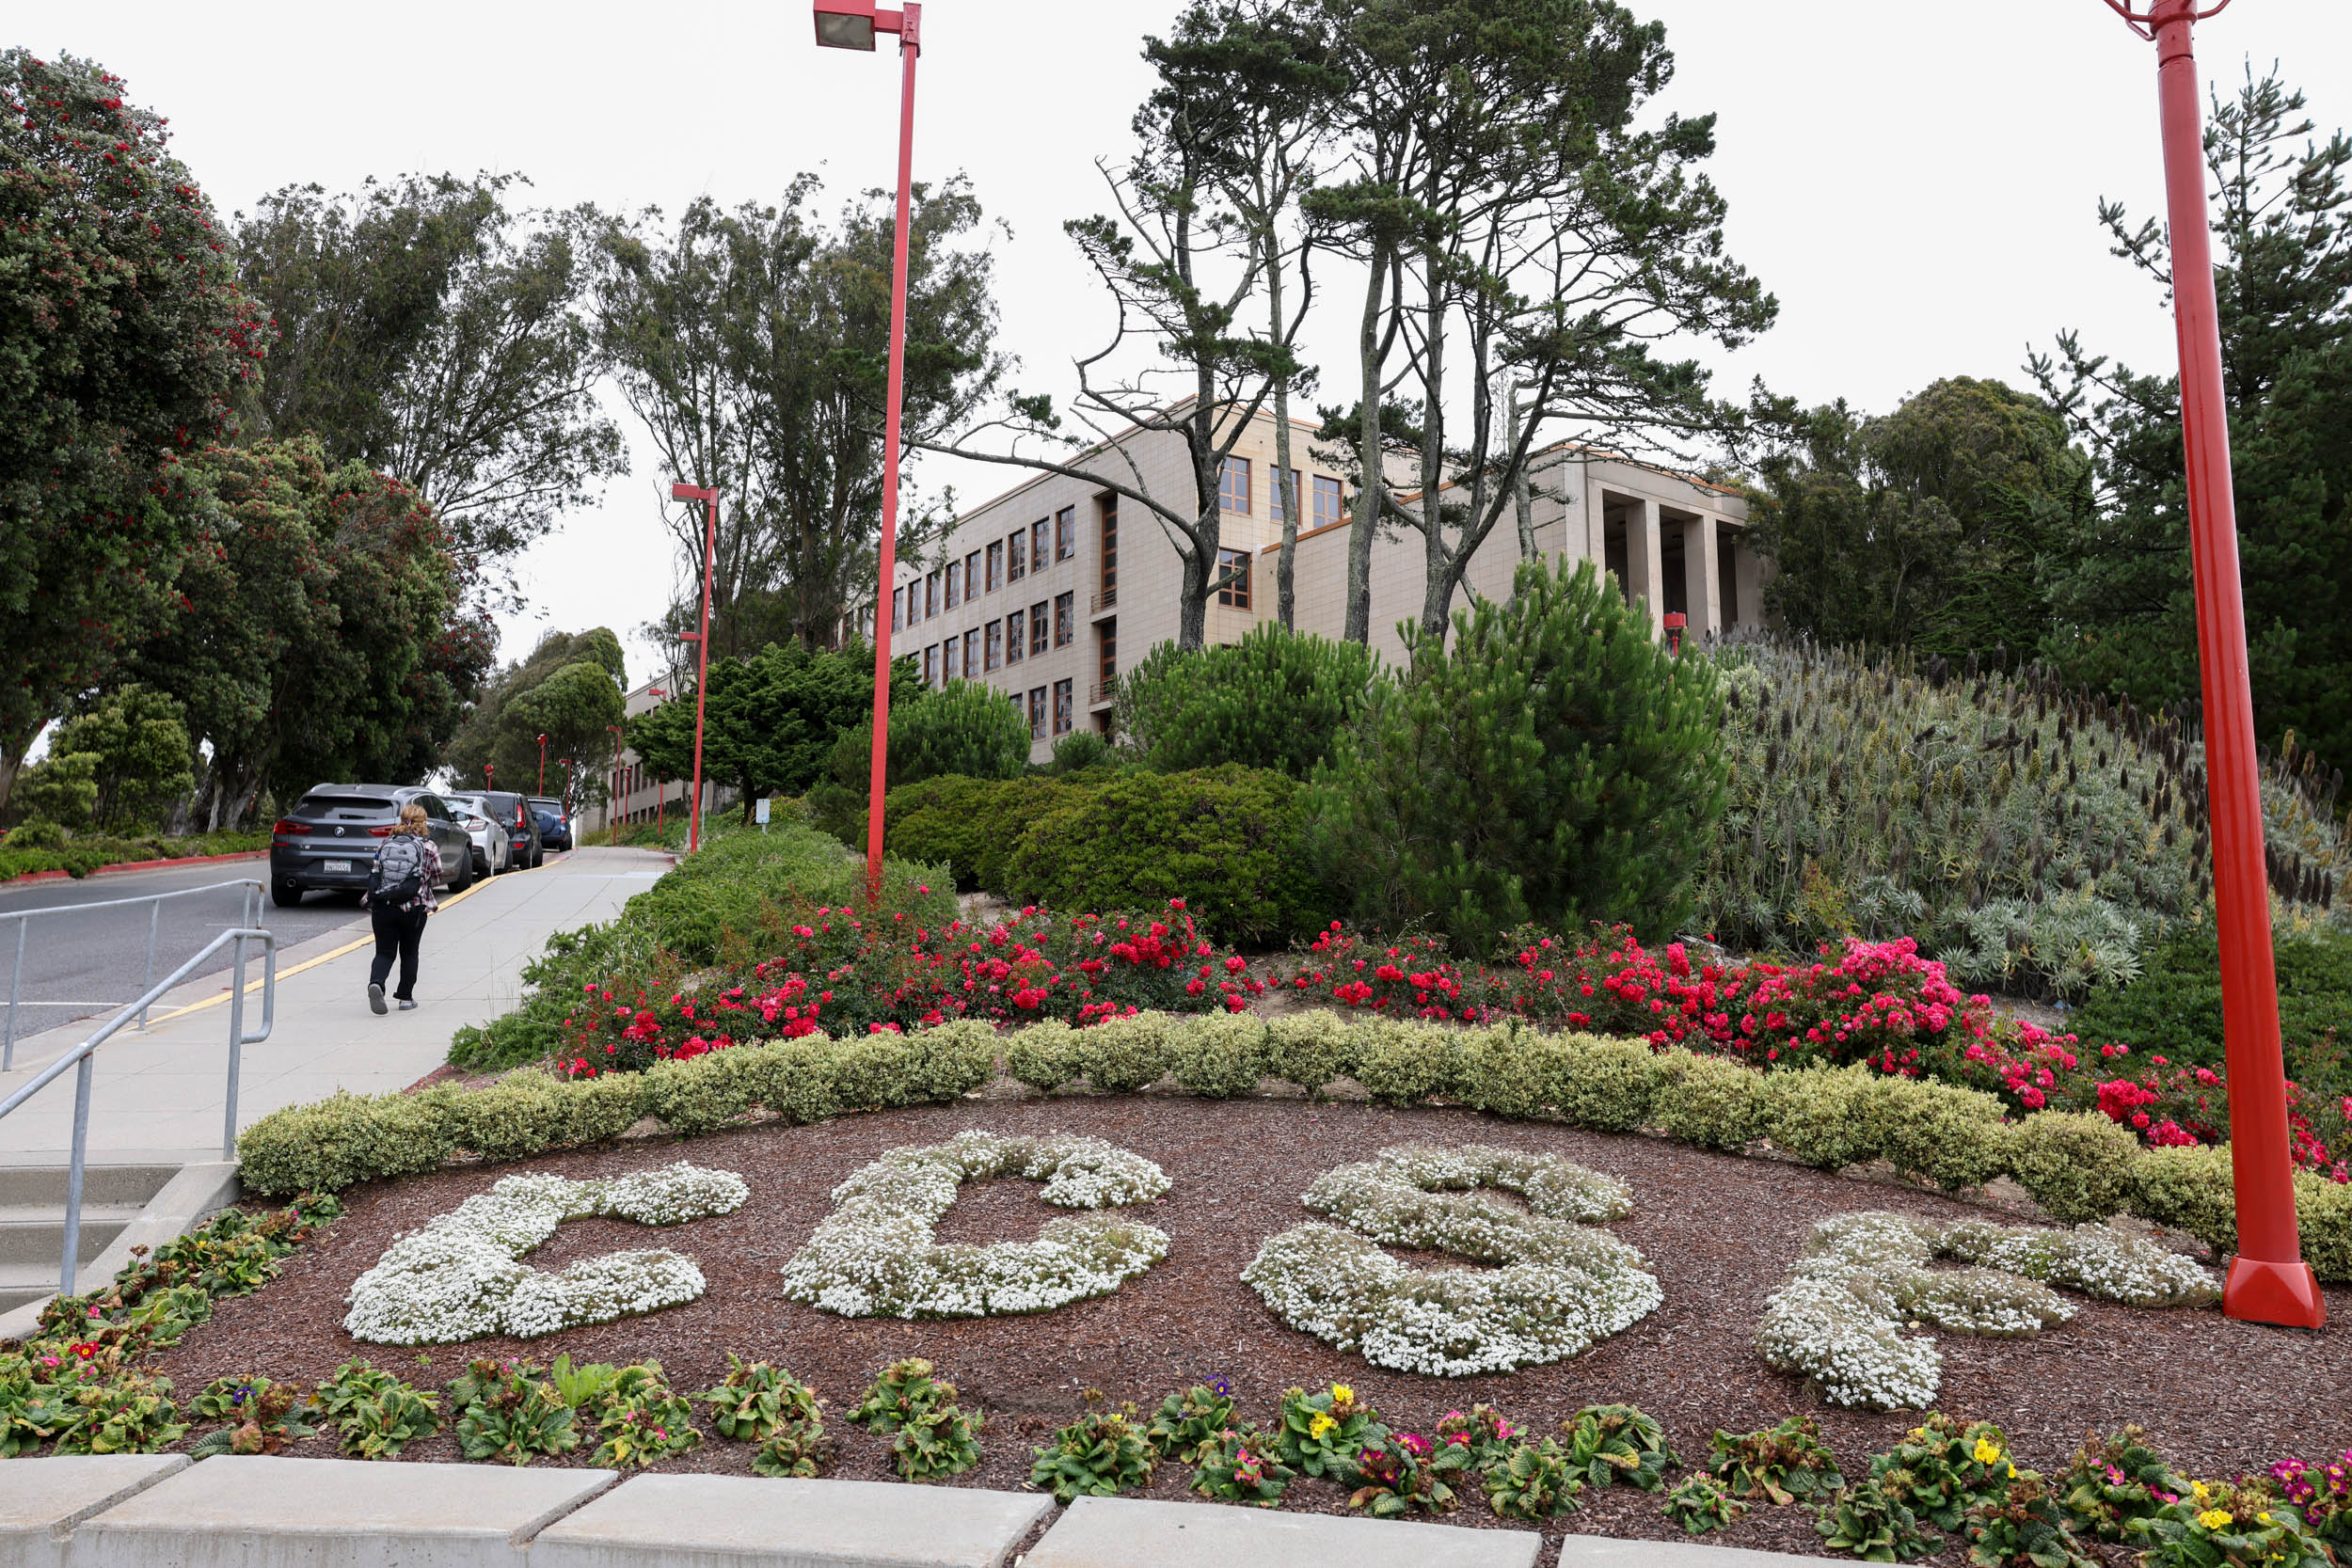 A bed of flowers planted in the shape of the letters "CCSF."